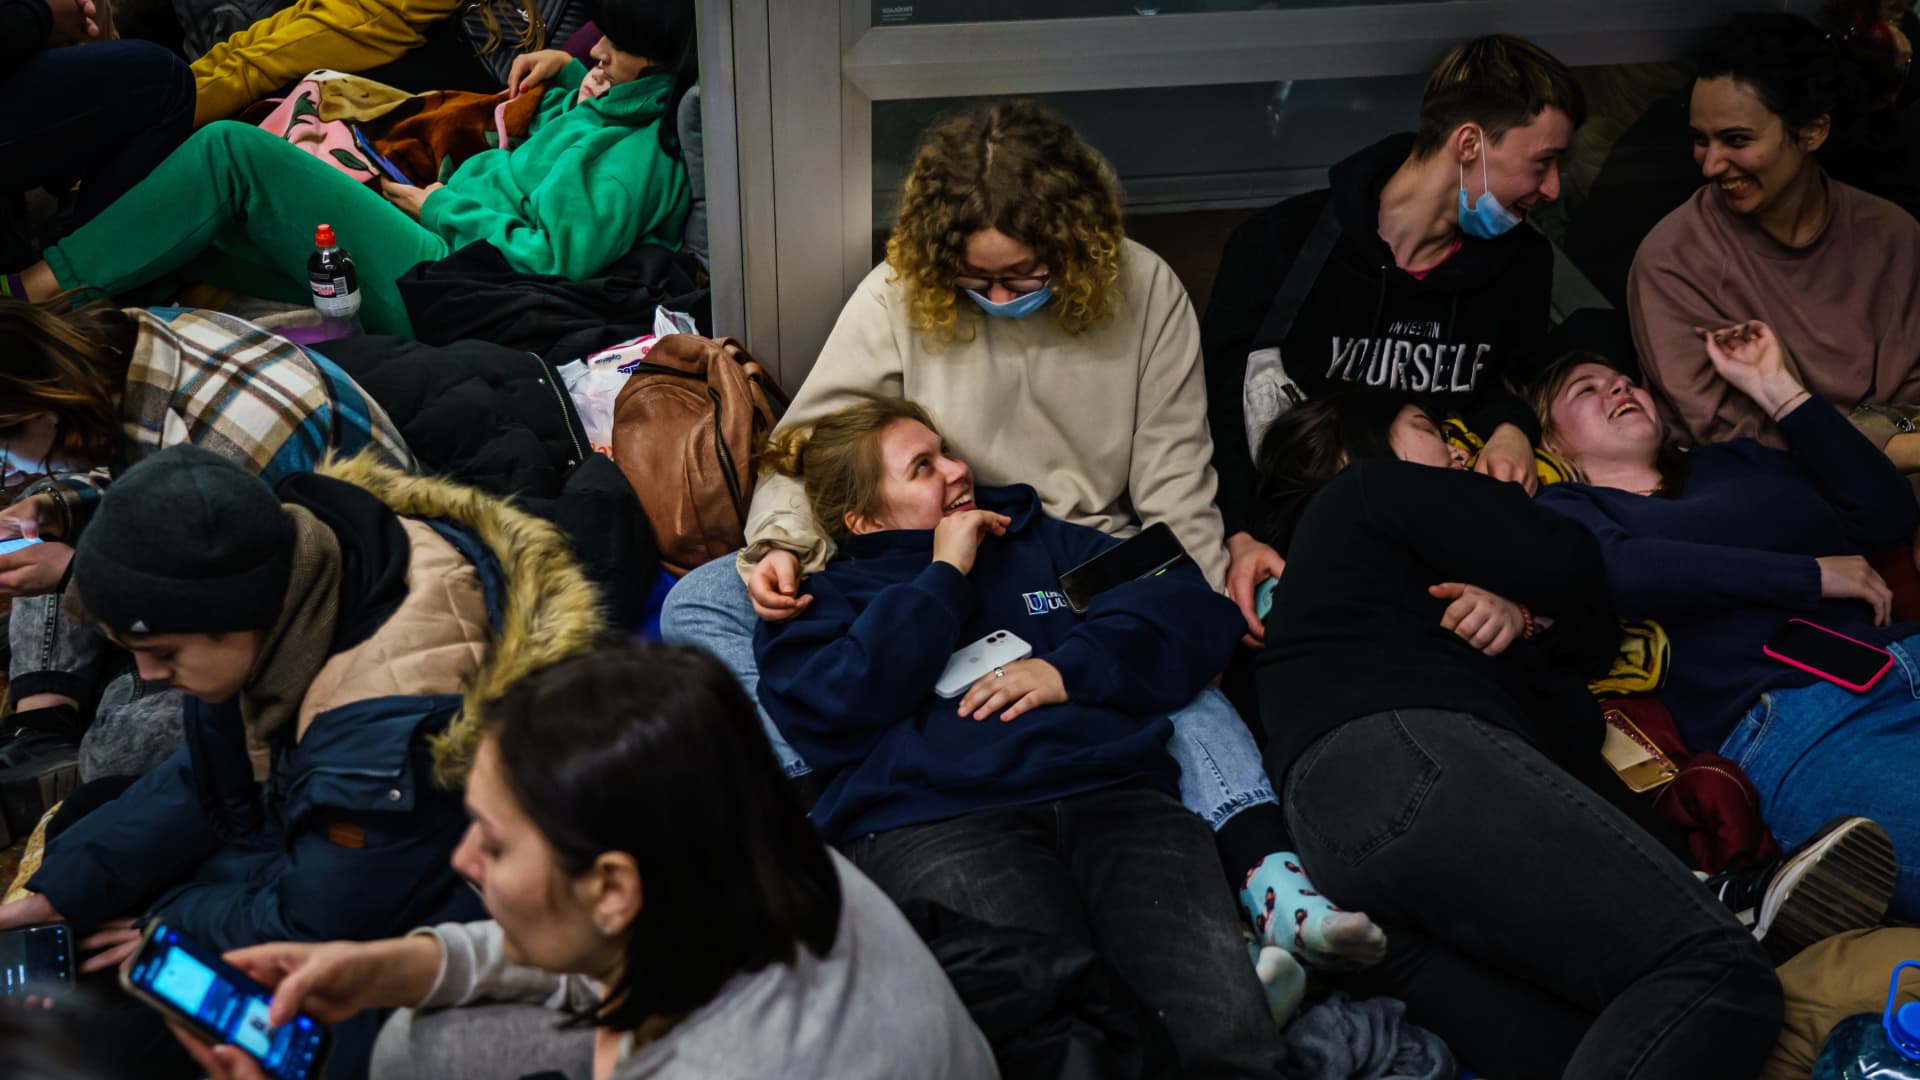 Hundreds of people seek shelter underground, on the platform, inside the dark train cars, and even in the emergency exits, in metro subway station as the Russian invasion of Ukraine continues, in Kharkiv, Ukraine, Thursday, Feb. 24, 2022.